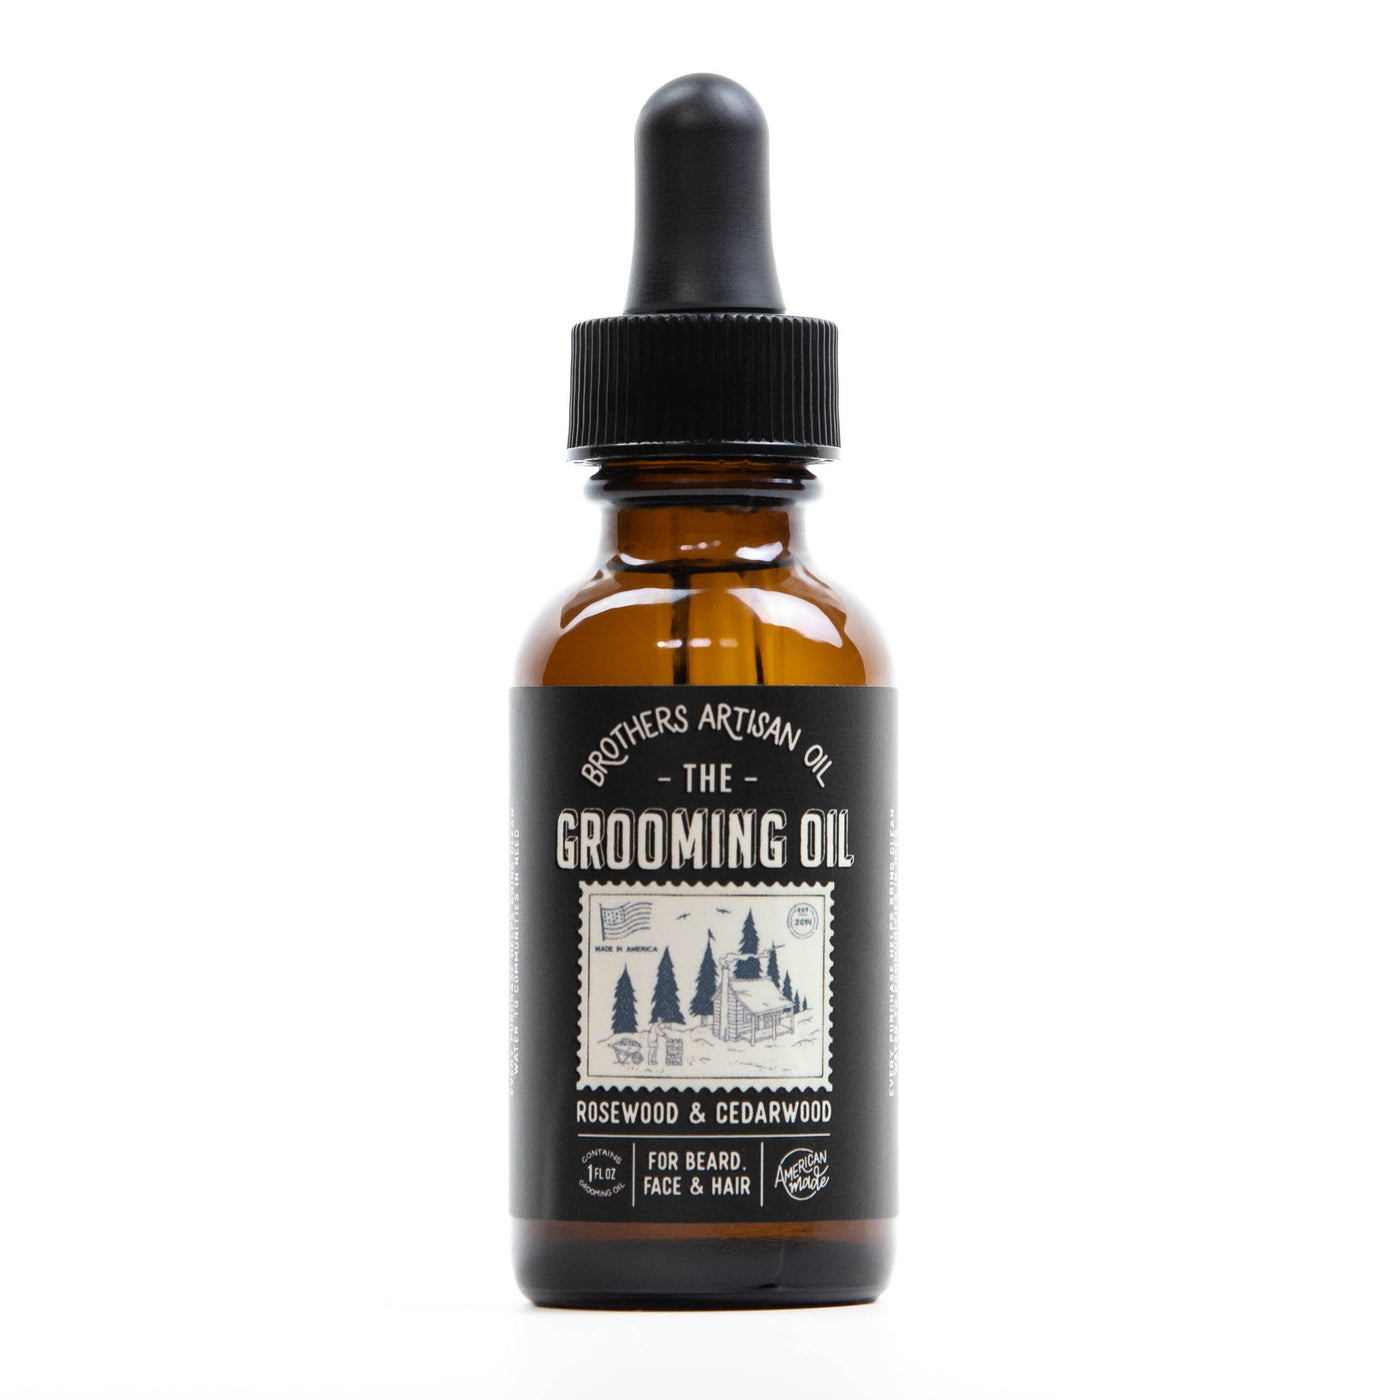 The Grooming Oil: Rosewood & Cedarwood by Brothers Artisan Oil